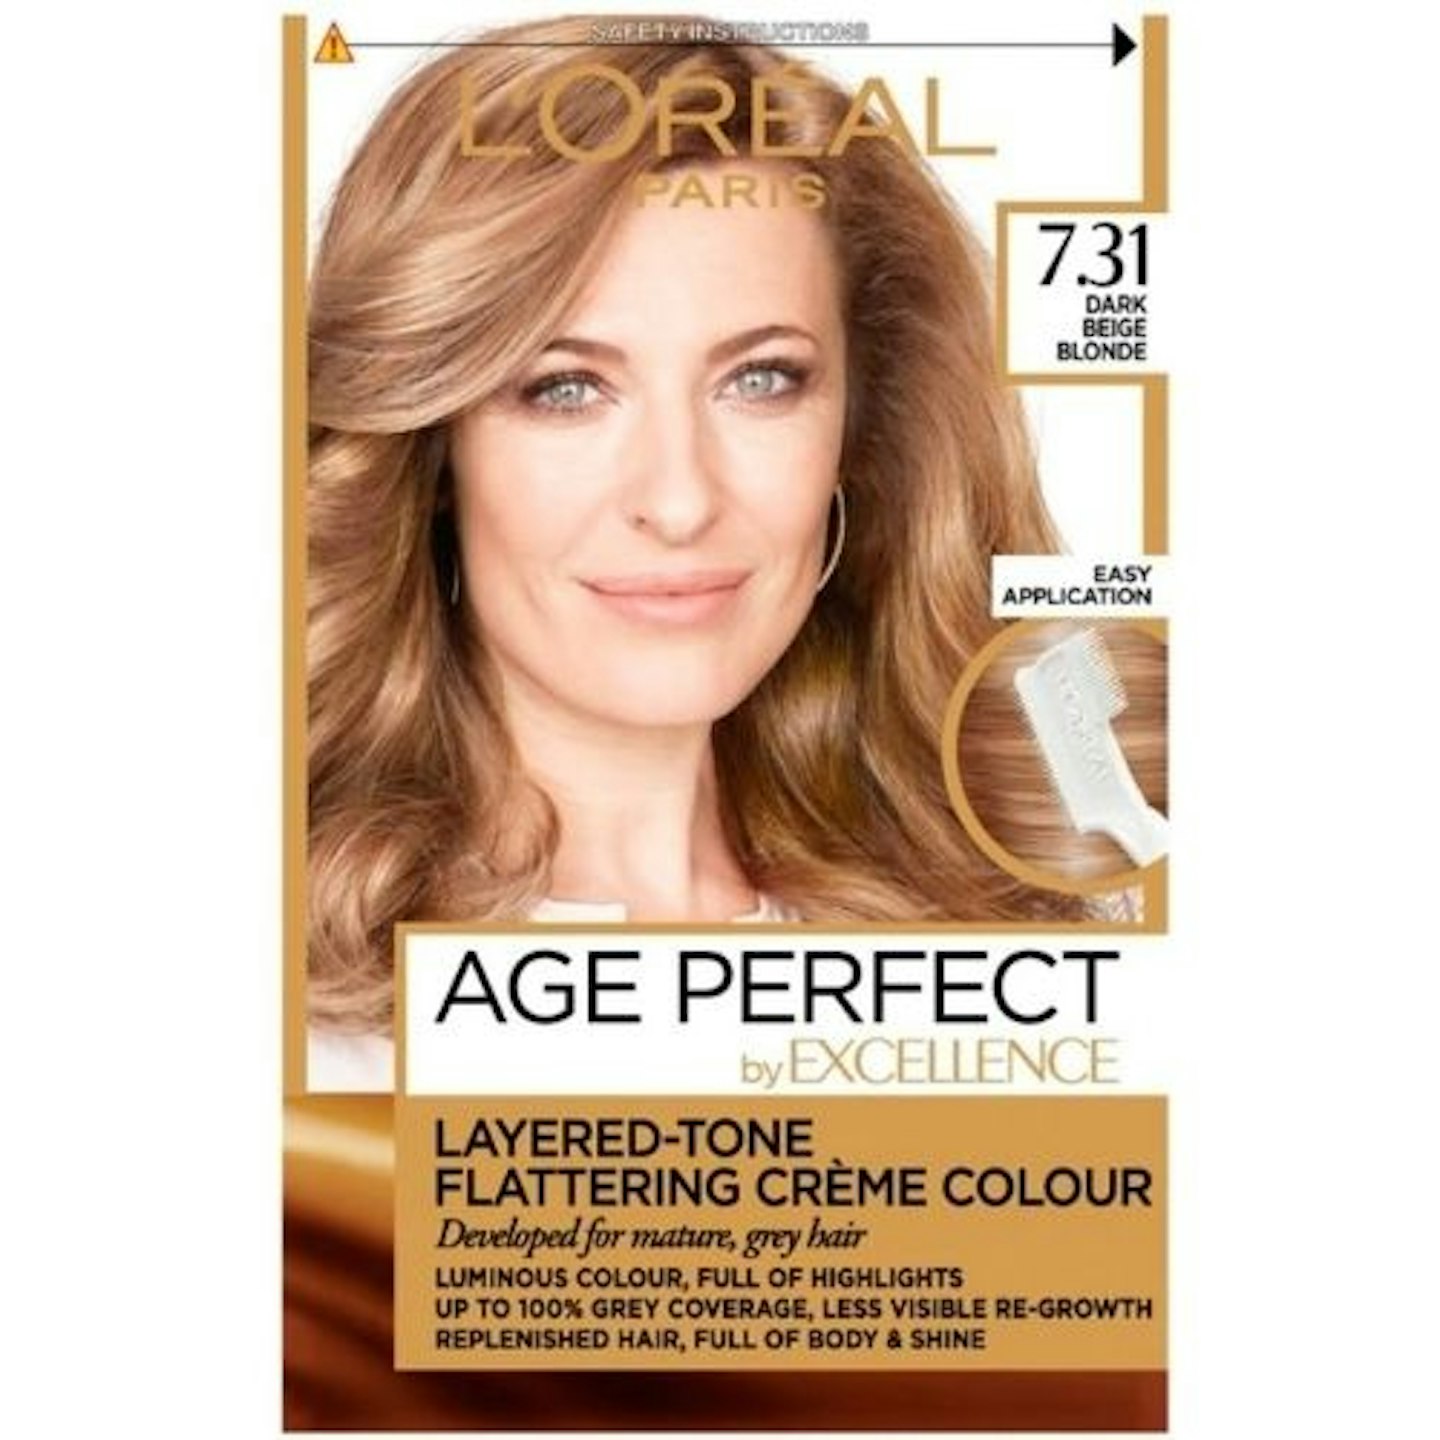 L'Oreal Excellence Age Perfect 7.31 Dark Caramel Blonde Hair Dye